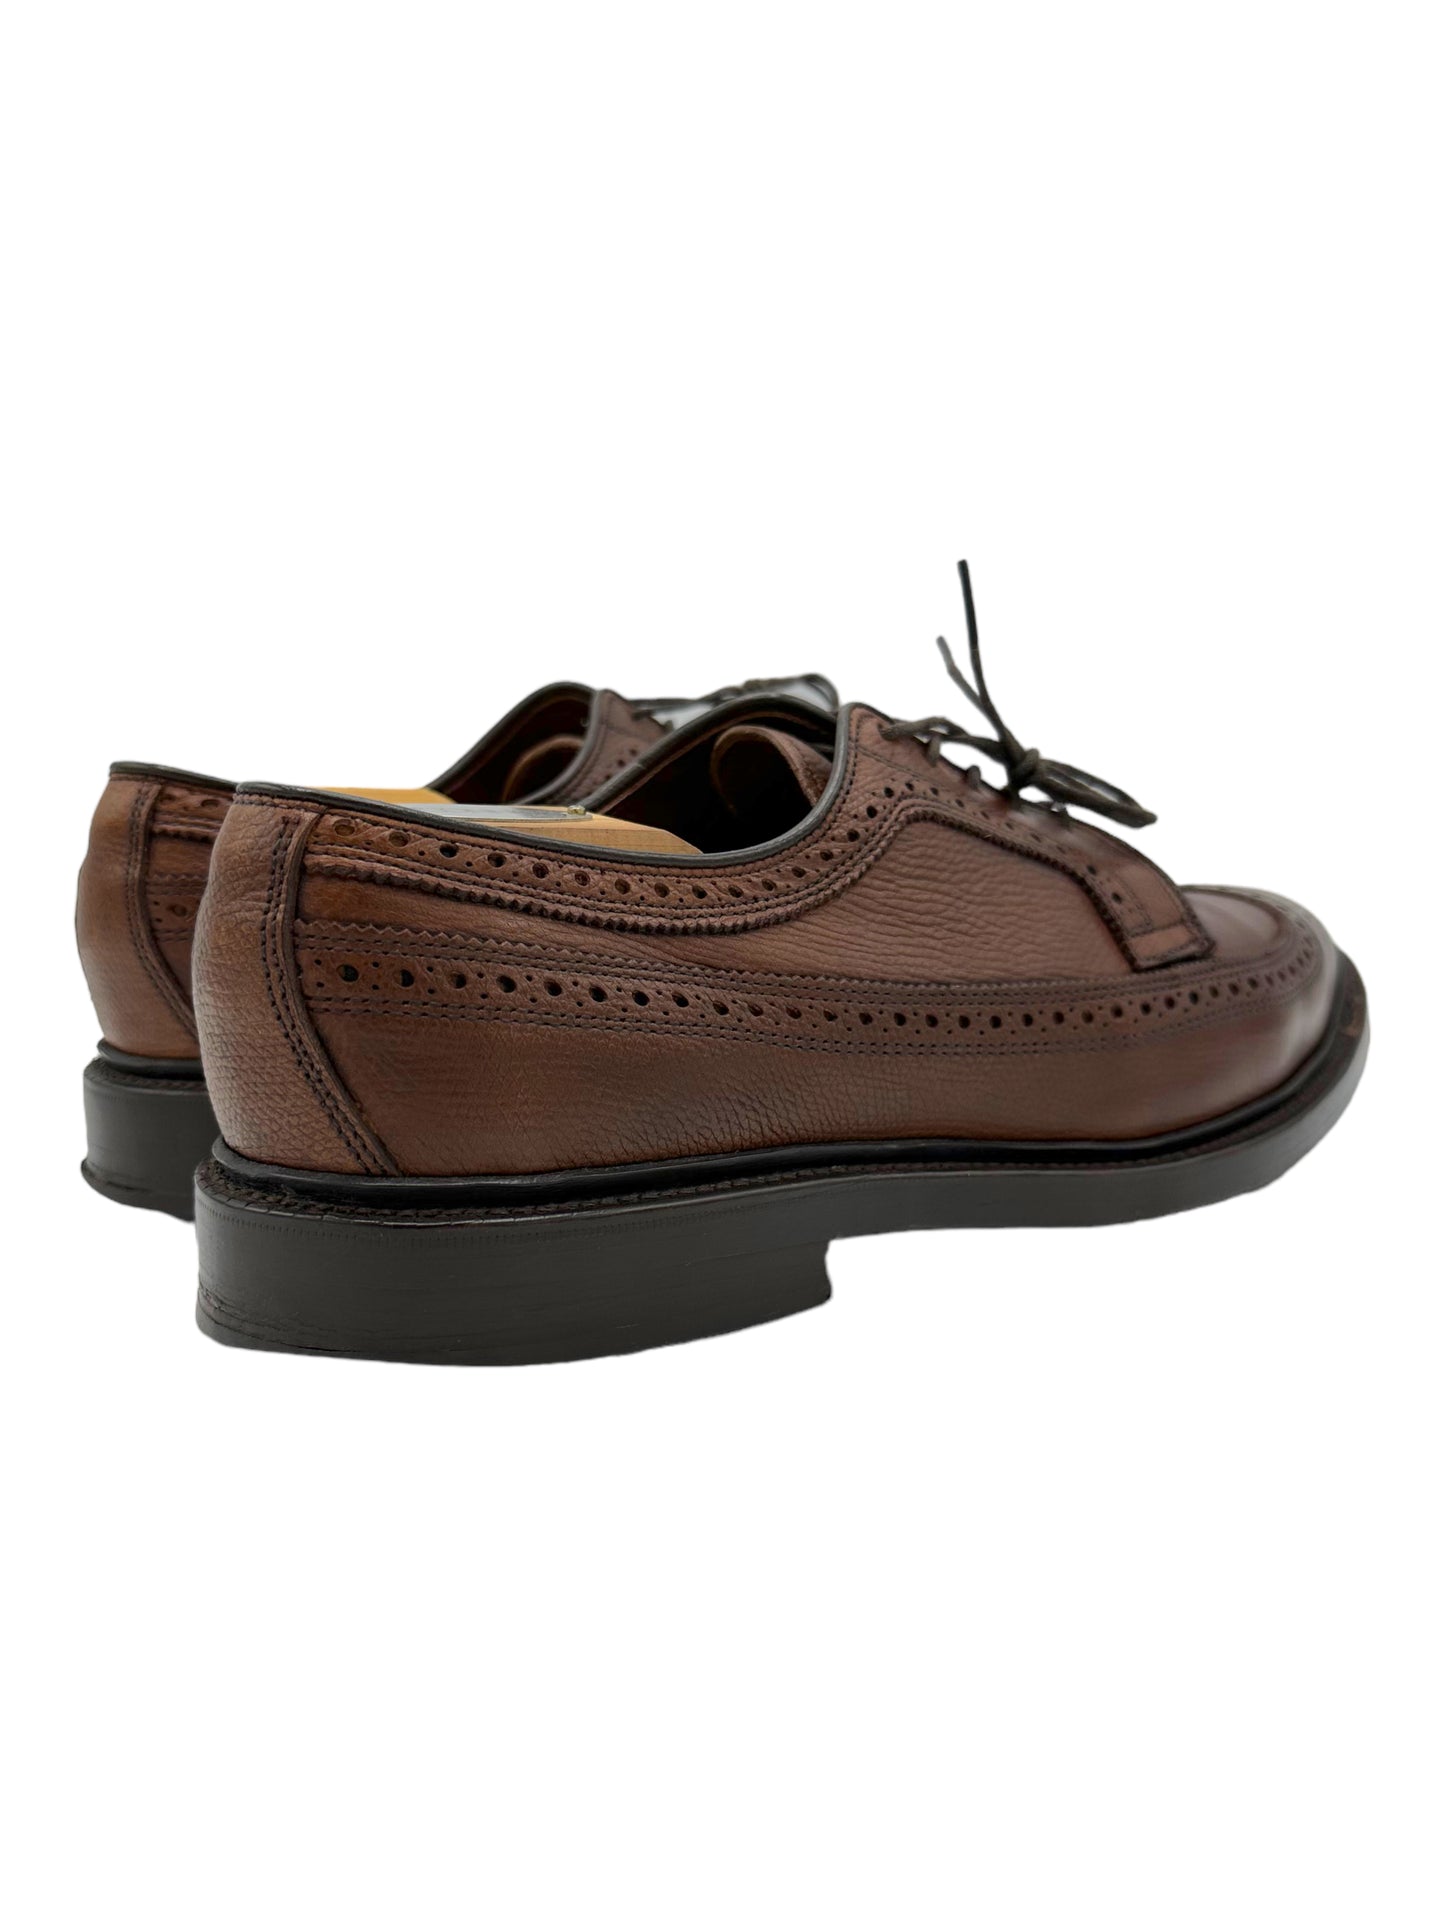 Allen Edmonds Walnut Grain Macneil Longwing Dress Shoes - Genuine Design Luxury Consignment Calgary, Alberta, Canada New and Pre-Owned Clothing, Shoes, Accessories.